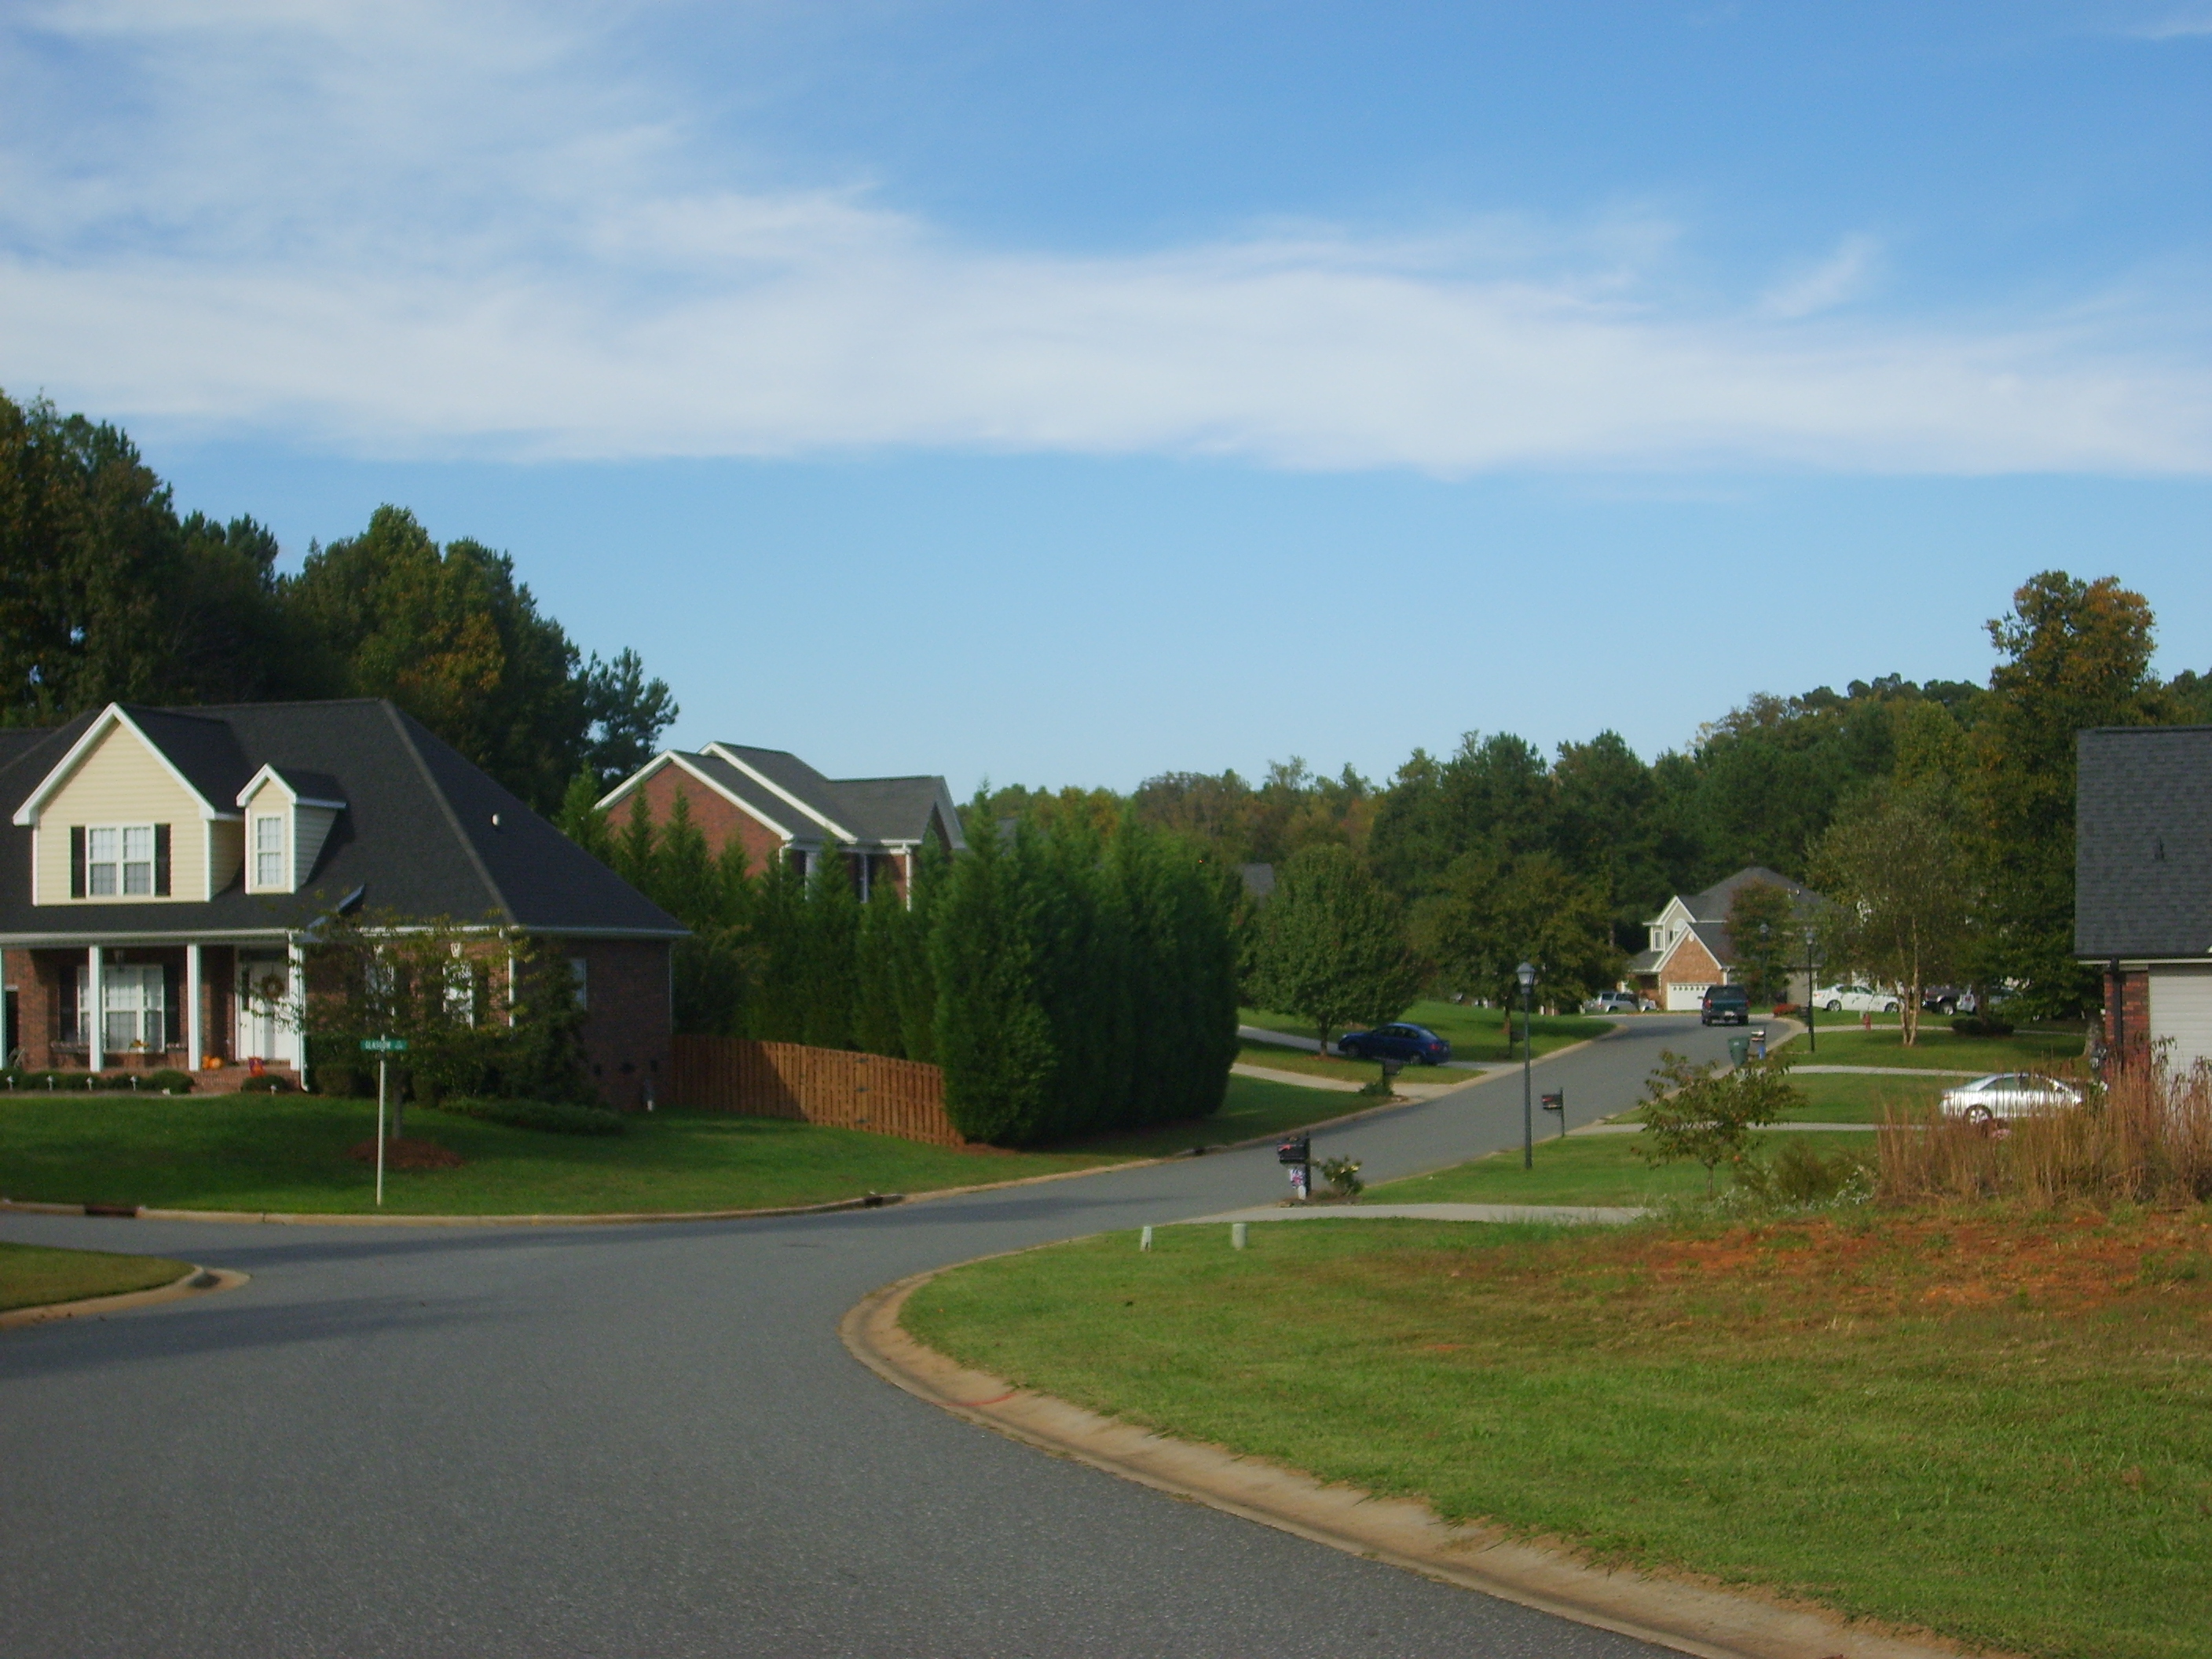 Looking for Gastonia Real Estate?  Try Cambridge Estates.